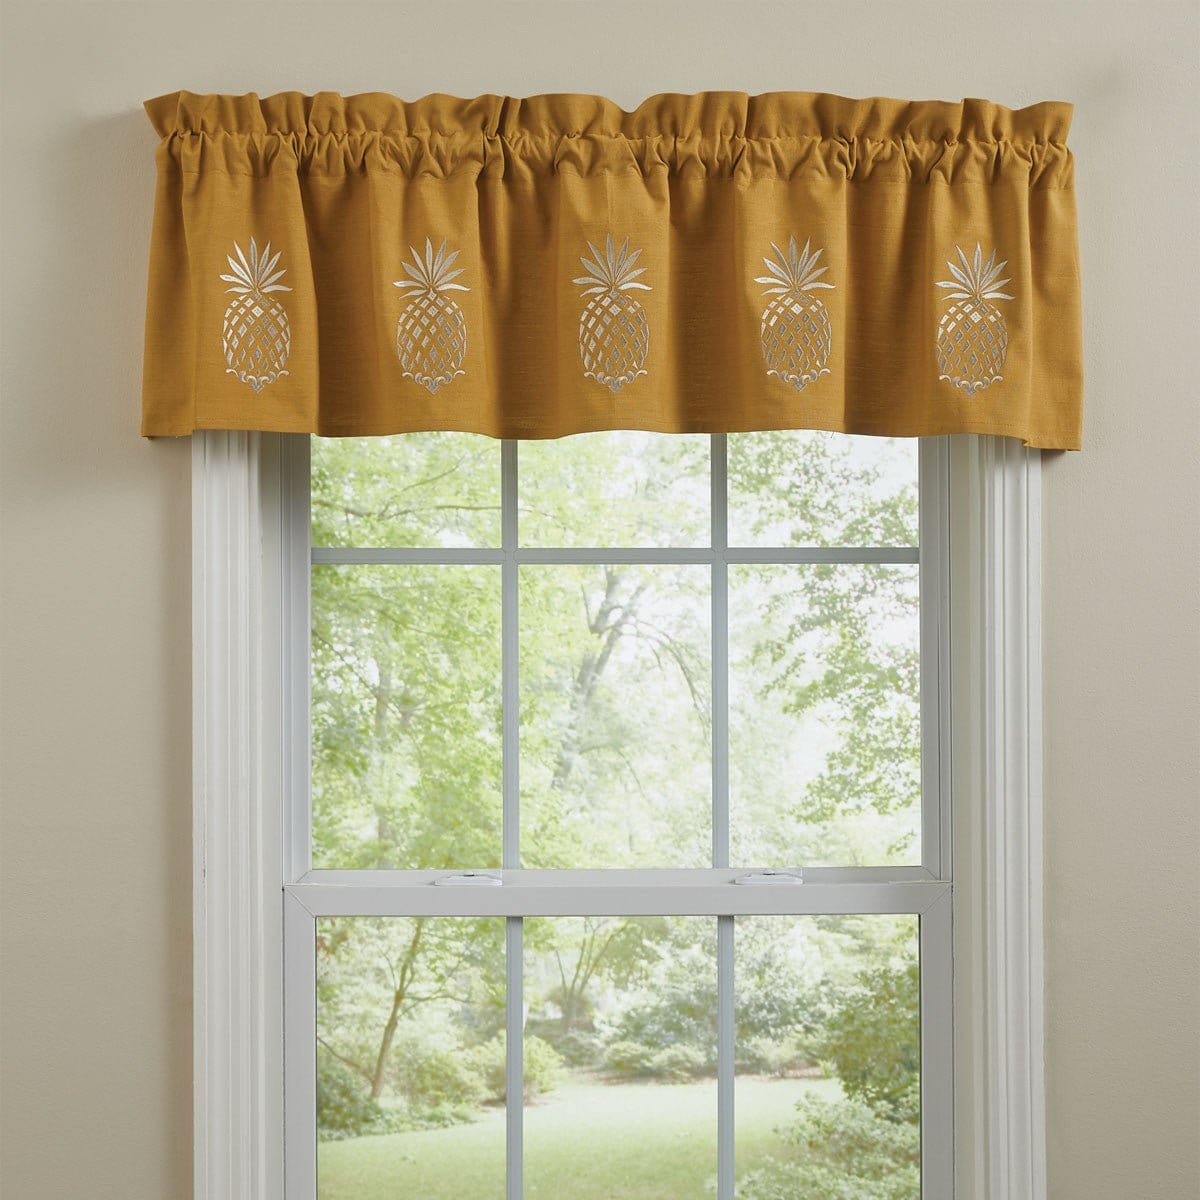 Pineapple Embroidered Valance Lined-Park Designs-The Village Merchant